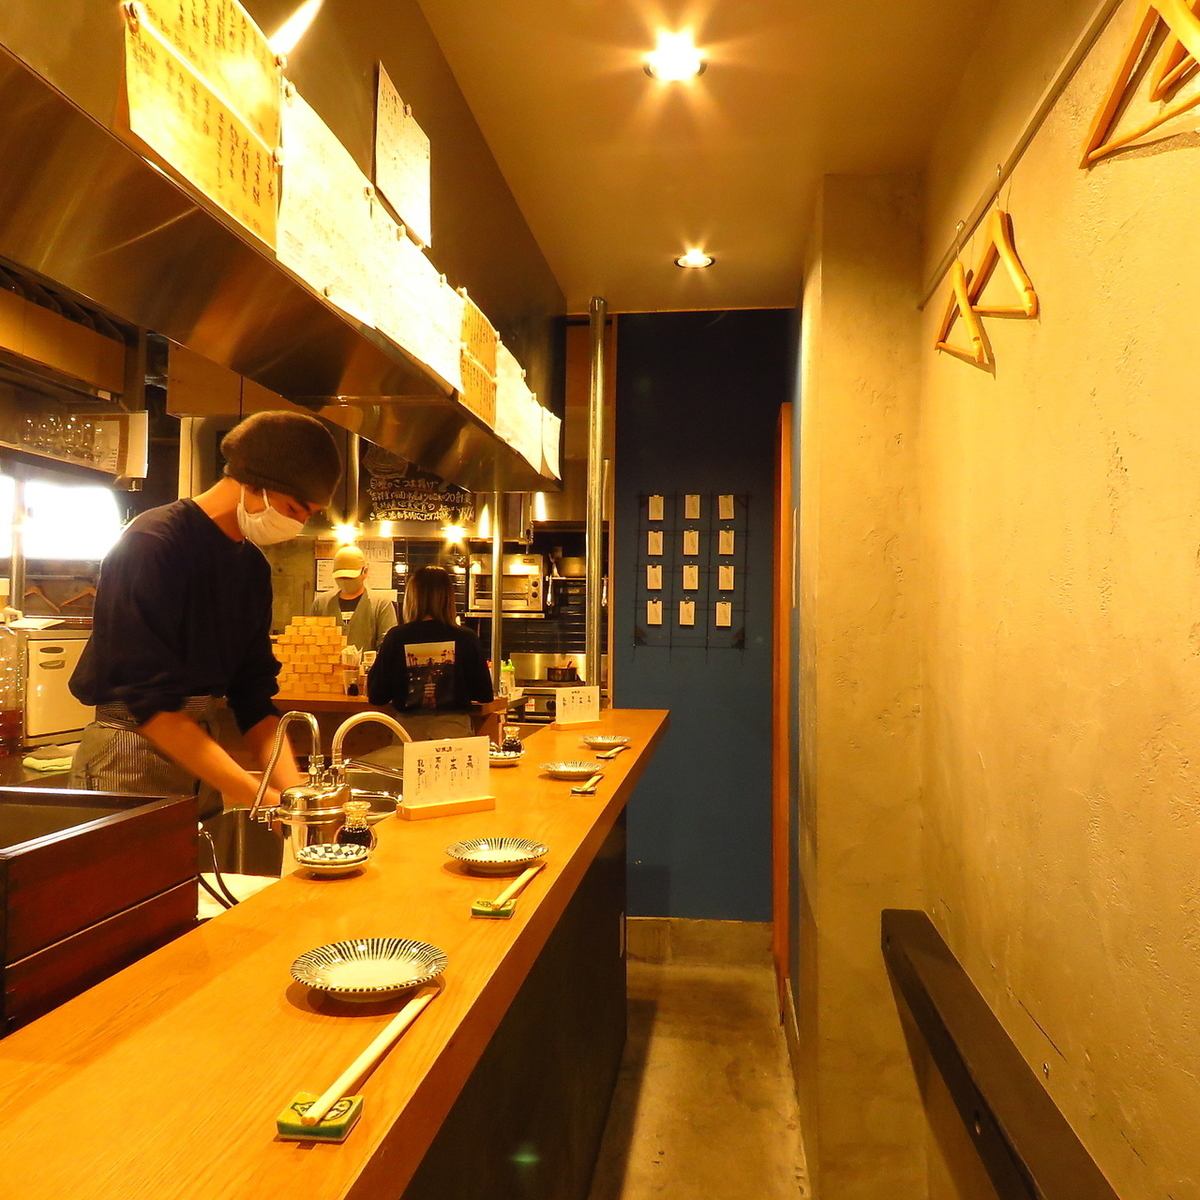 Very popular counter seats ☆ Enjoy our carefully selected dishes ♪